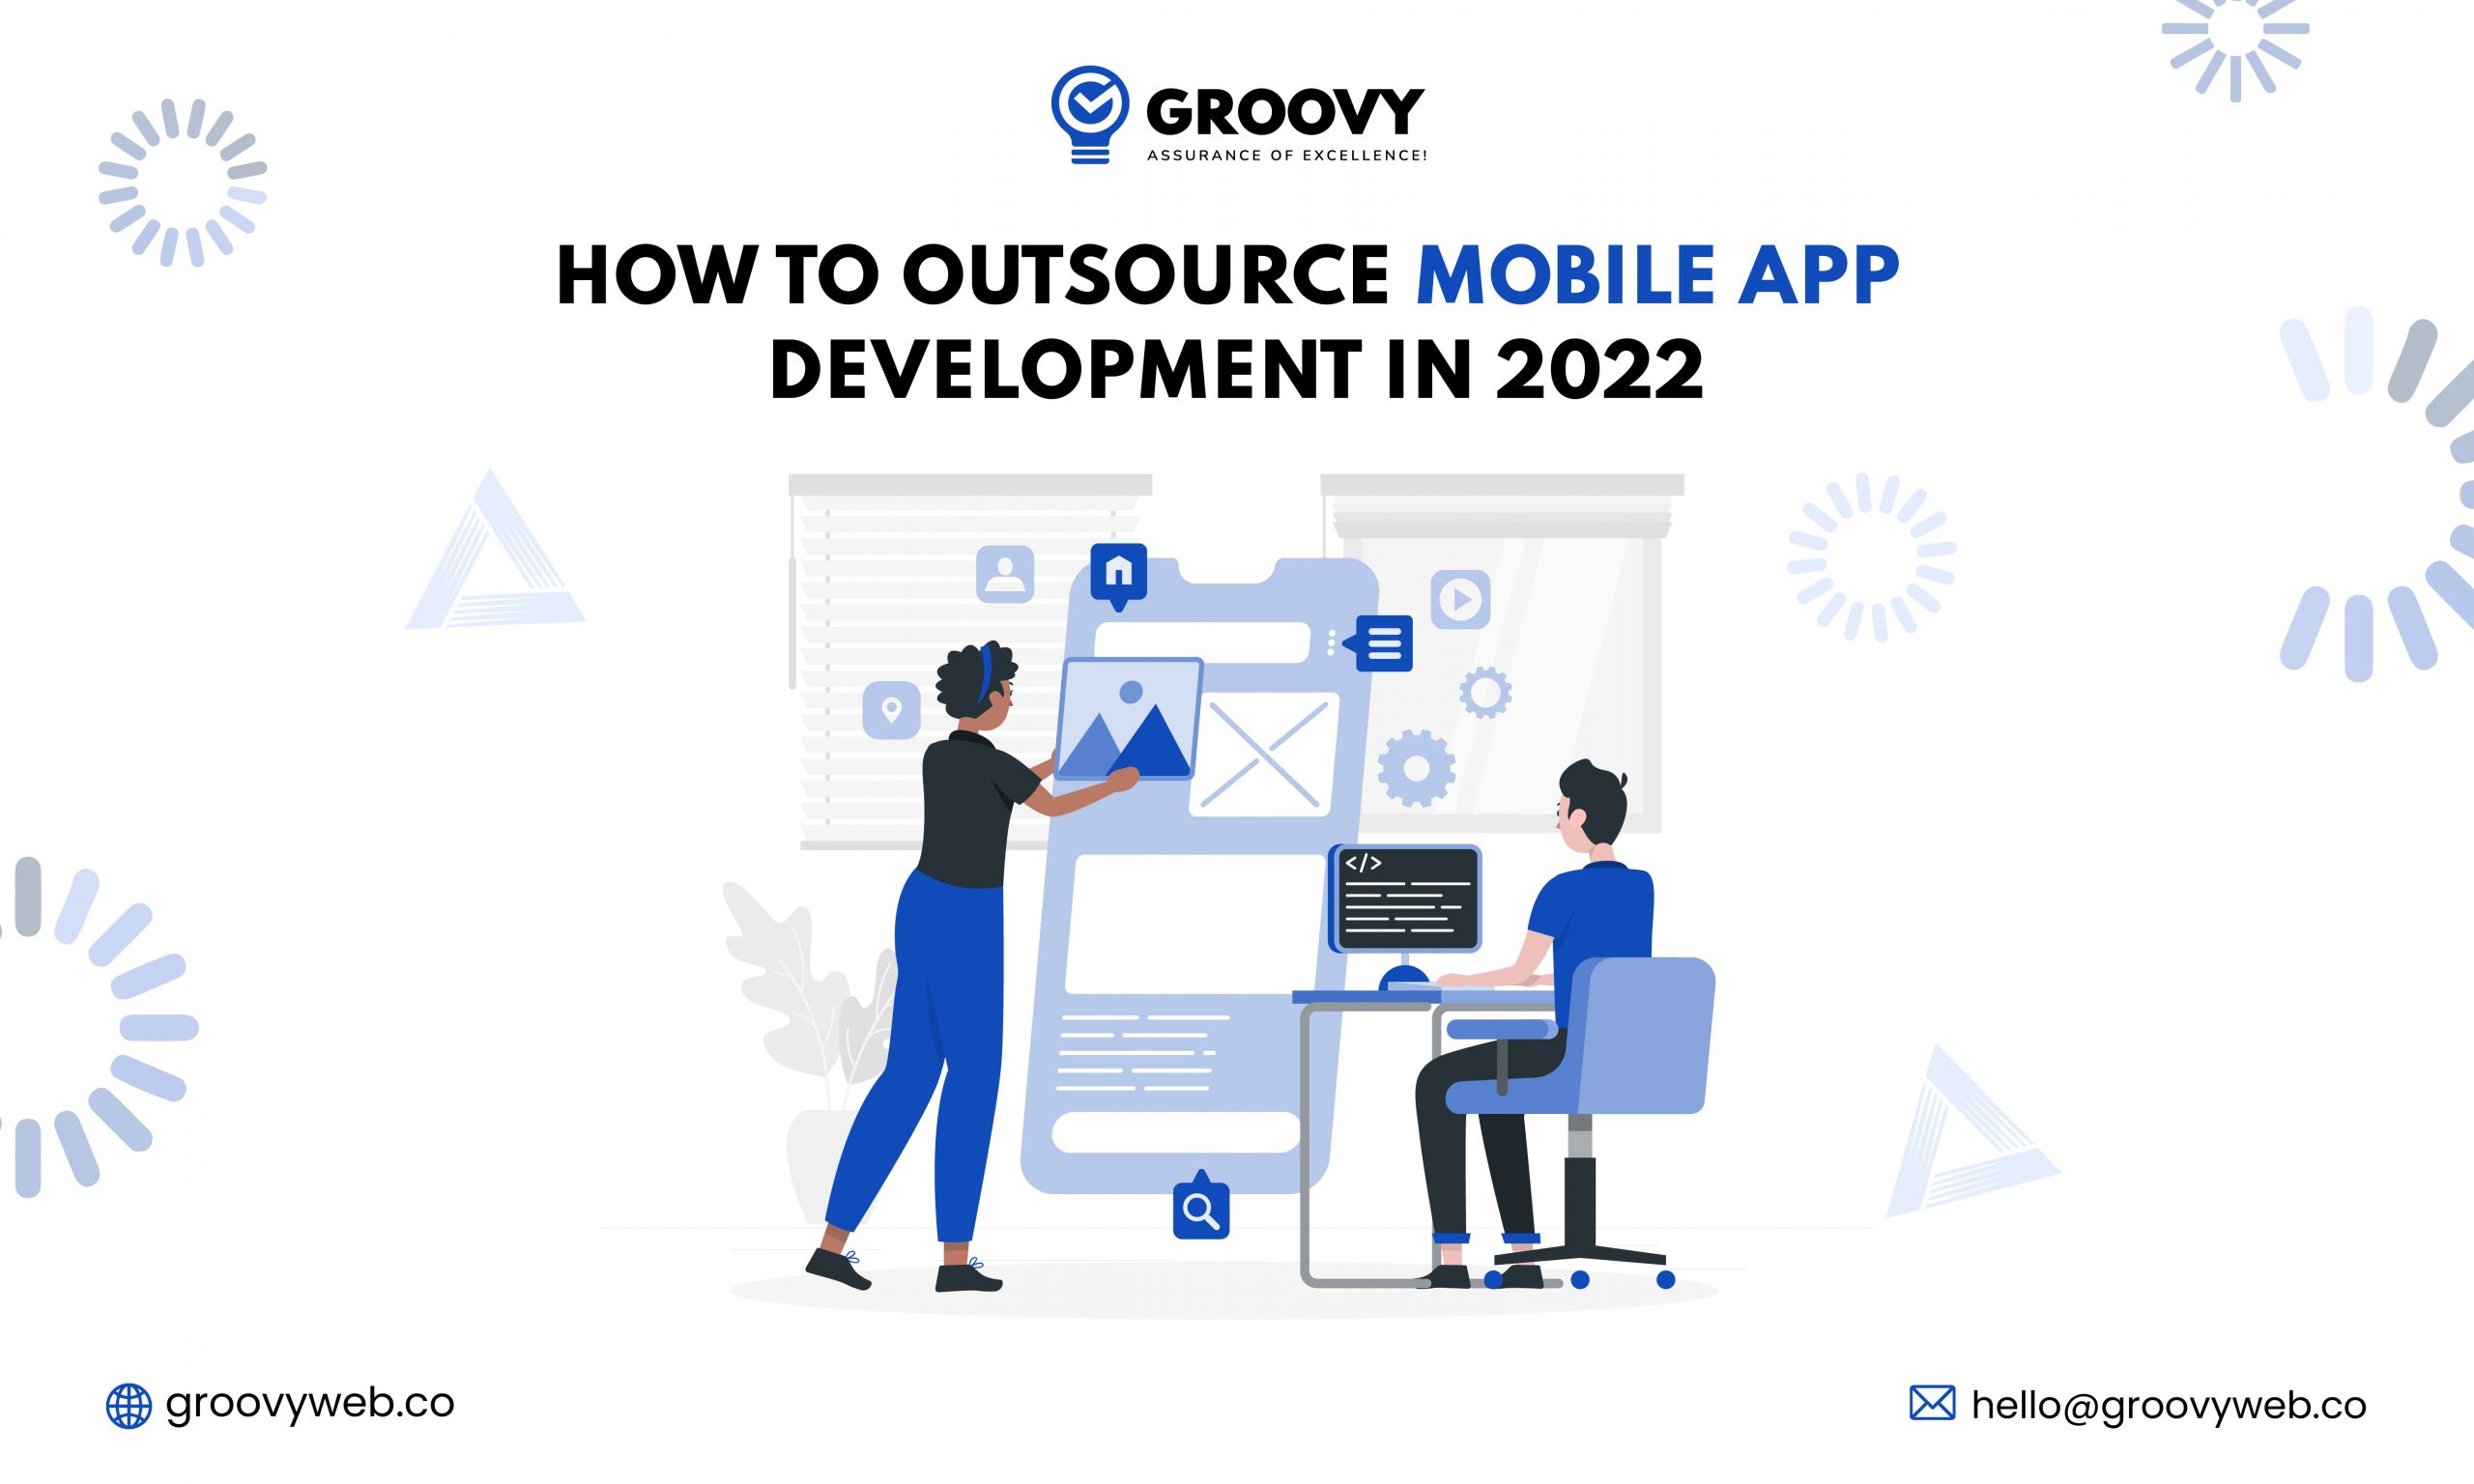 How to Outsource Mobile App